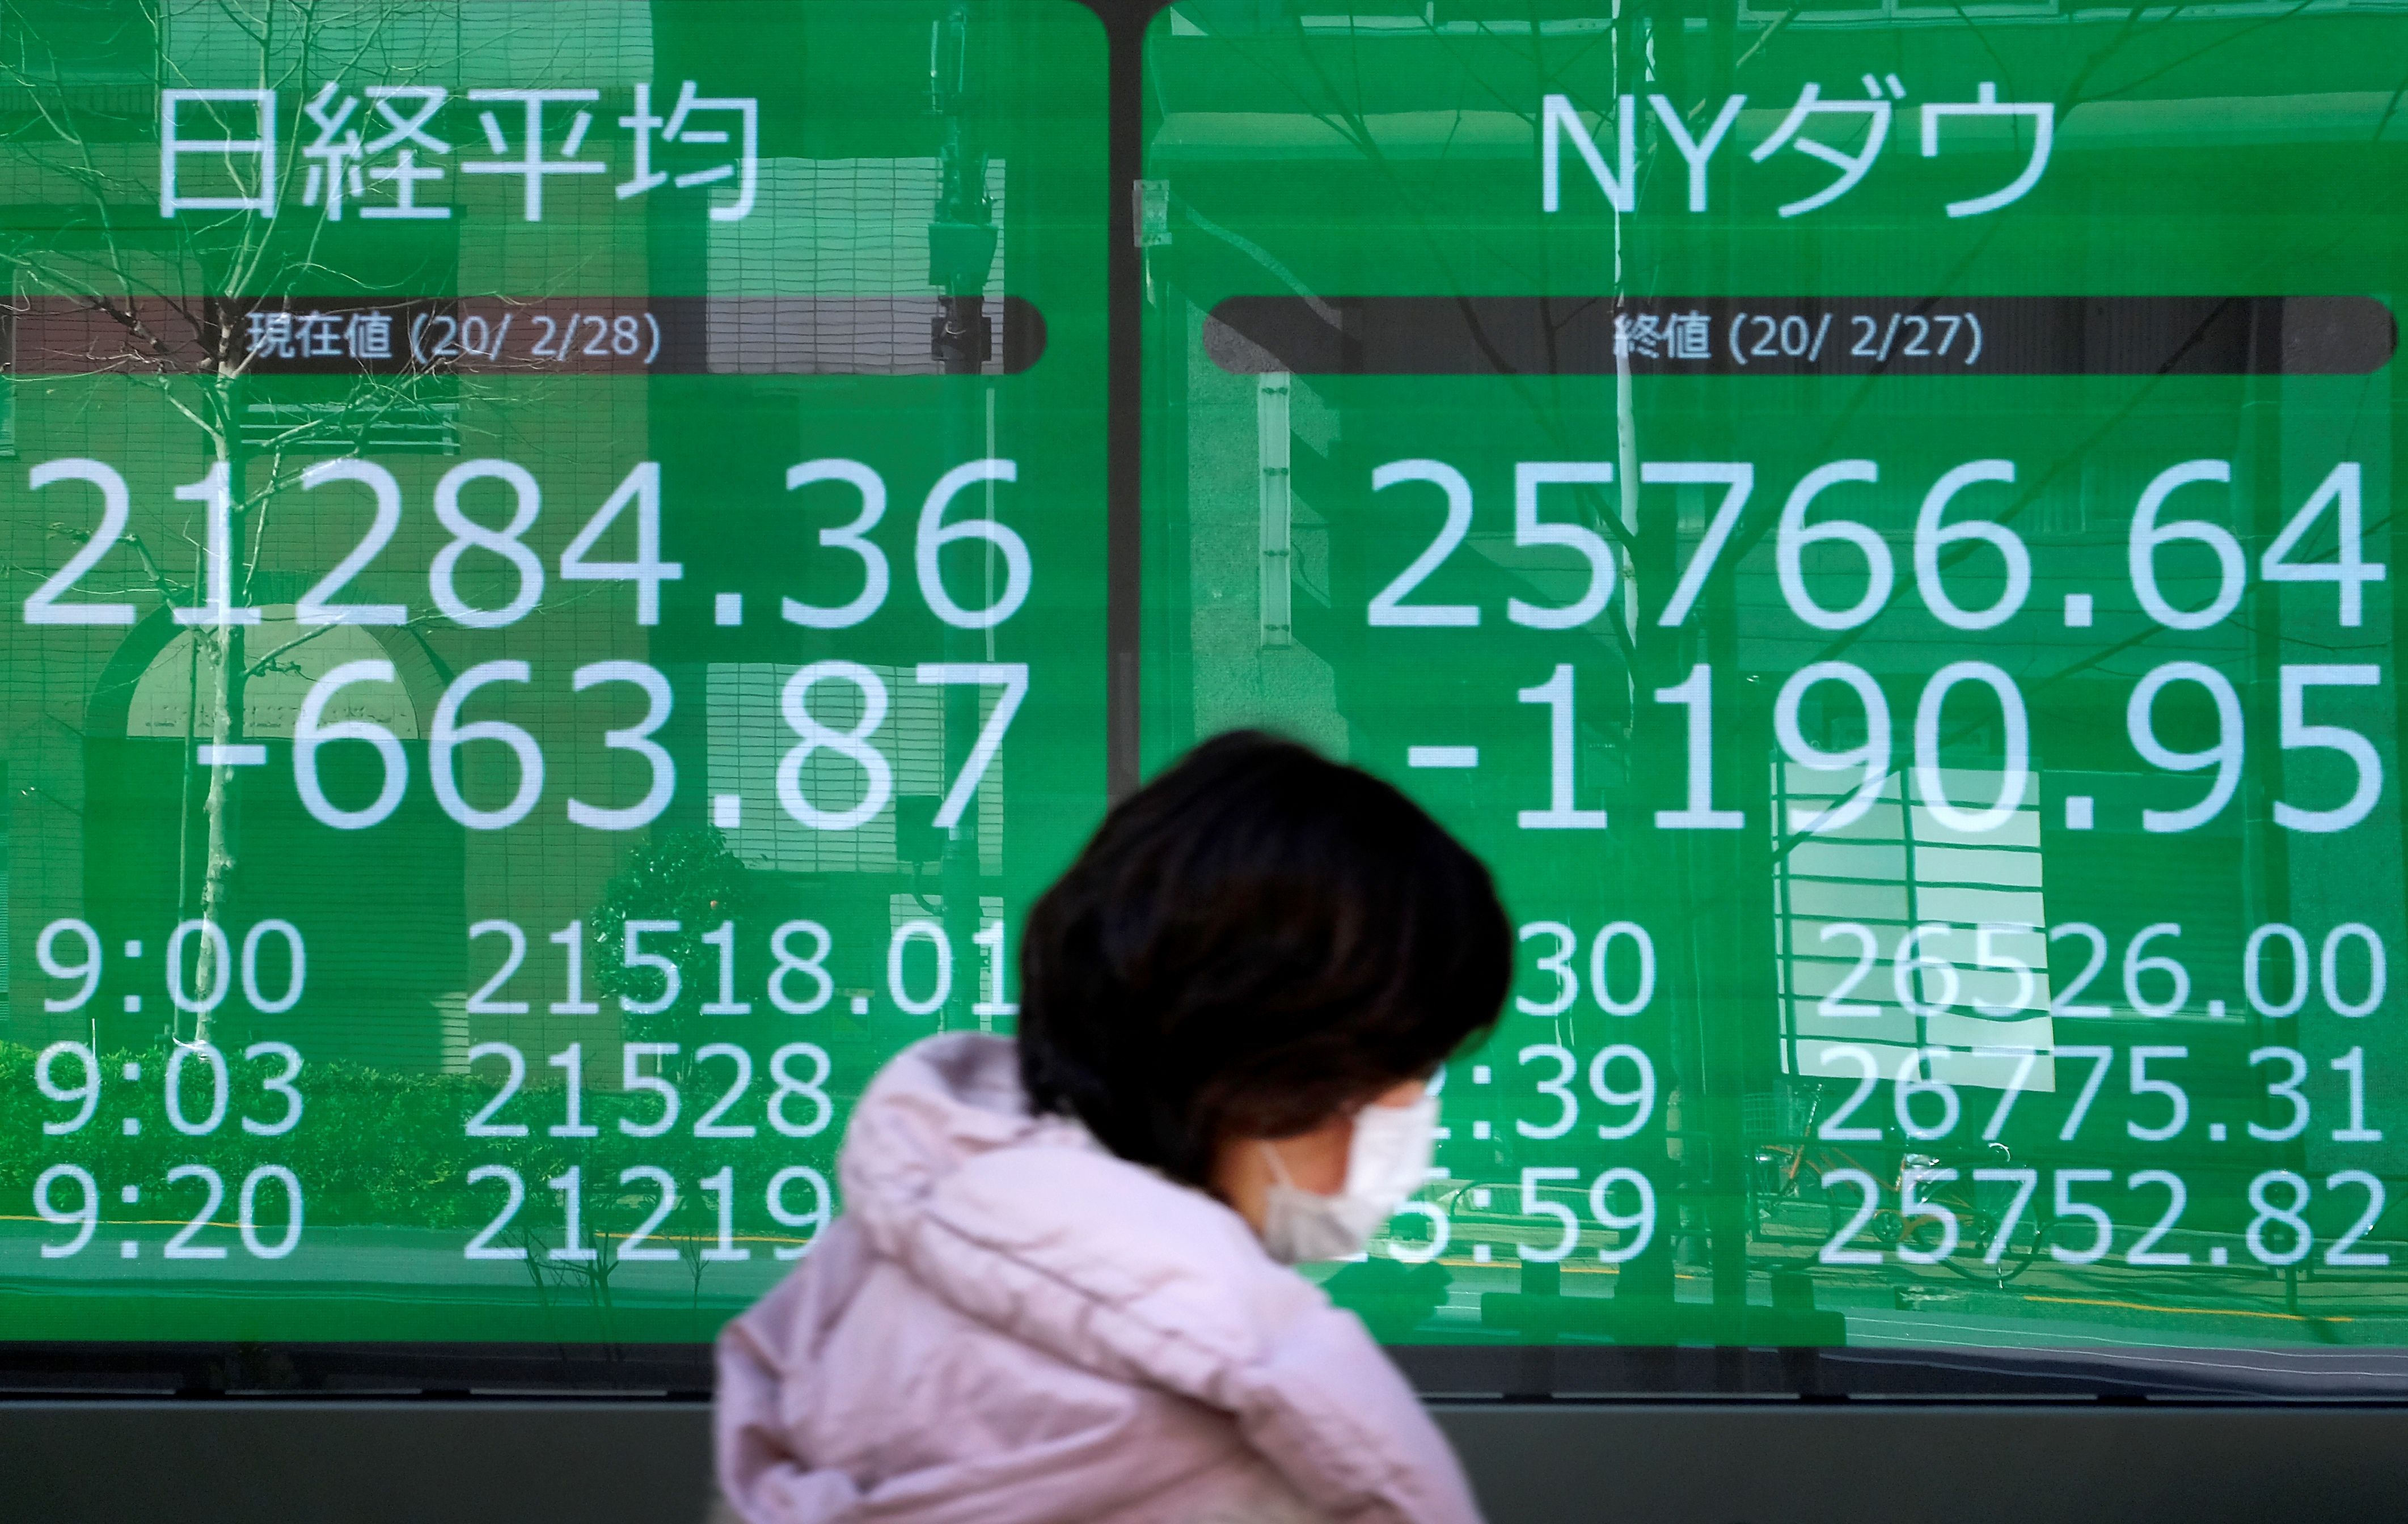 A pedestrian walk past an electronic quotation board displaying share prices of the Nikkei 225 Index and New York Dow in Tokyo.